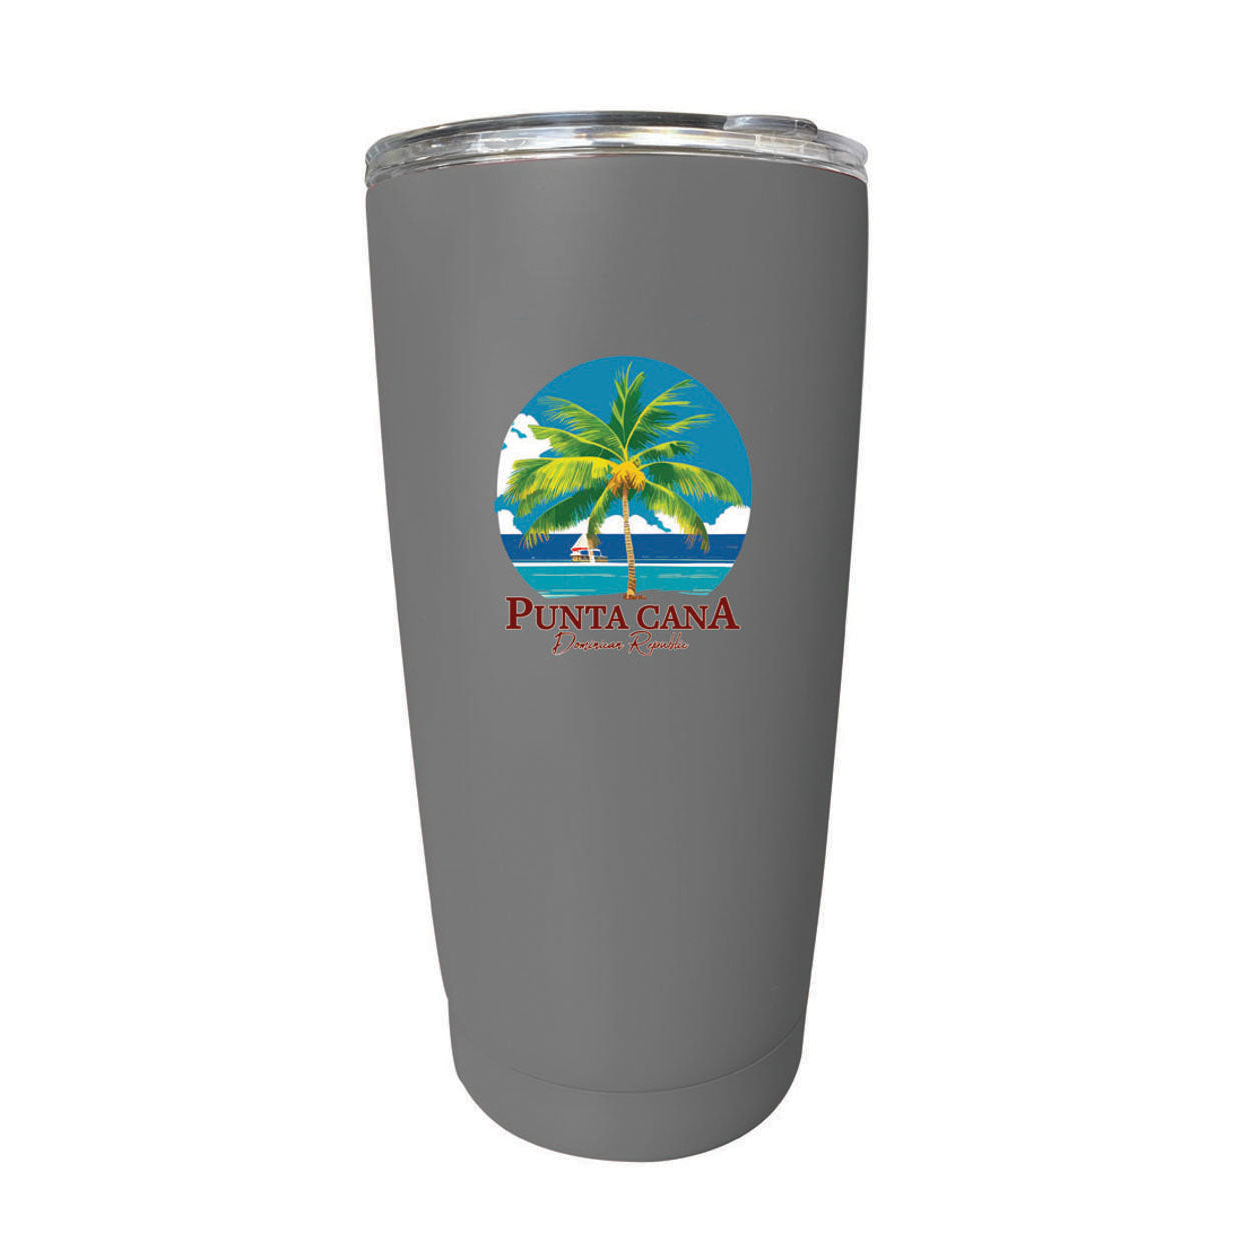 Punta Cana Dominican Republic Souvenir 16 Oz Stainless Steel Insulated Tumbler - Yellow, PARROT